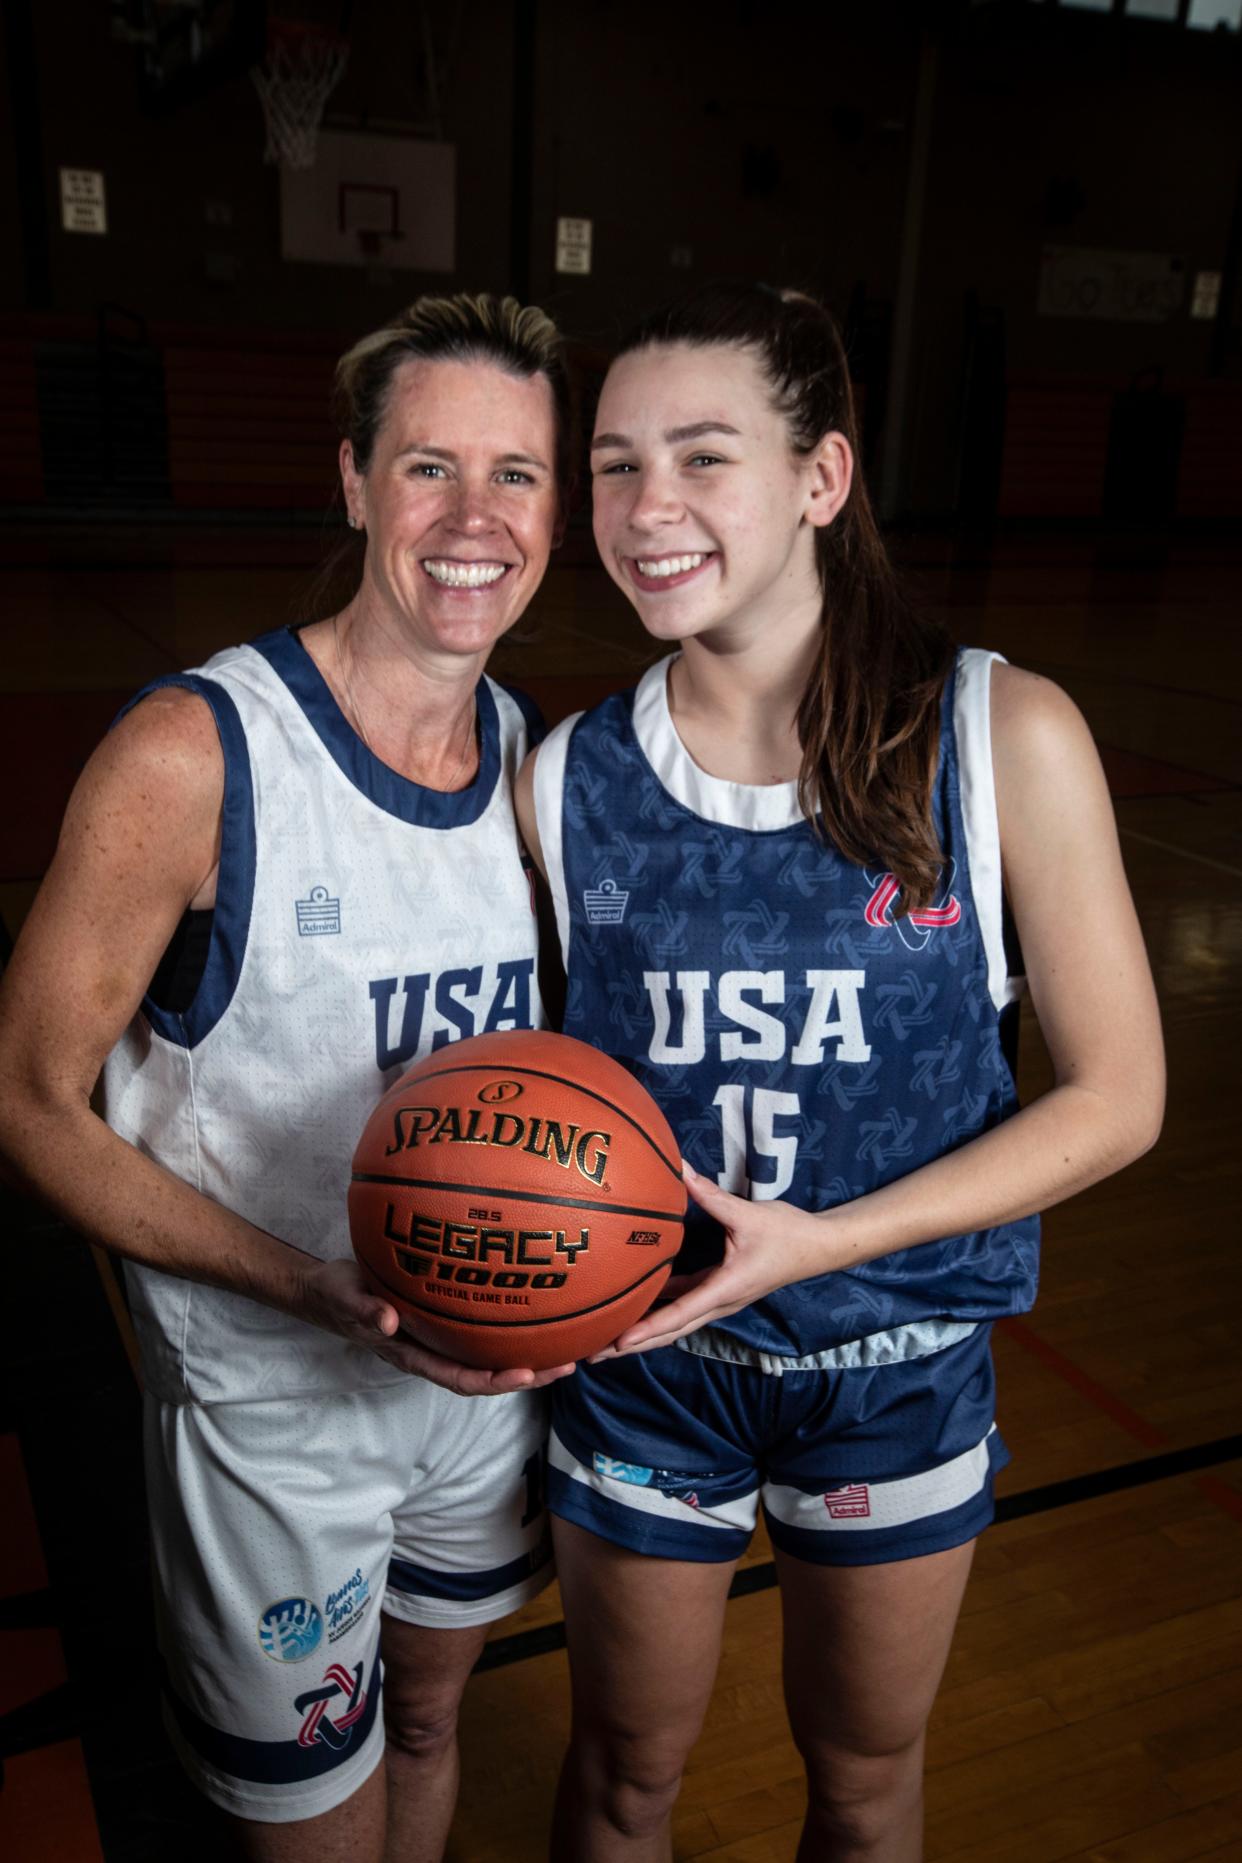 Carolyn Dorfman of Mamaroneck and her daughter Addison, 15, both won medals in basketball at the Maccabi Pan-Am Games in Argentina over the holidays. Caroline played on the USA open team, and Addison played on the USA U18 team. When countries pulled out over security concerns, Addison's team was forced to play against adult teams, including playing against her mother. They were photographed at Mamaroneck High School Jan. 15, 2024.